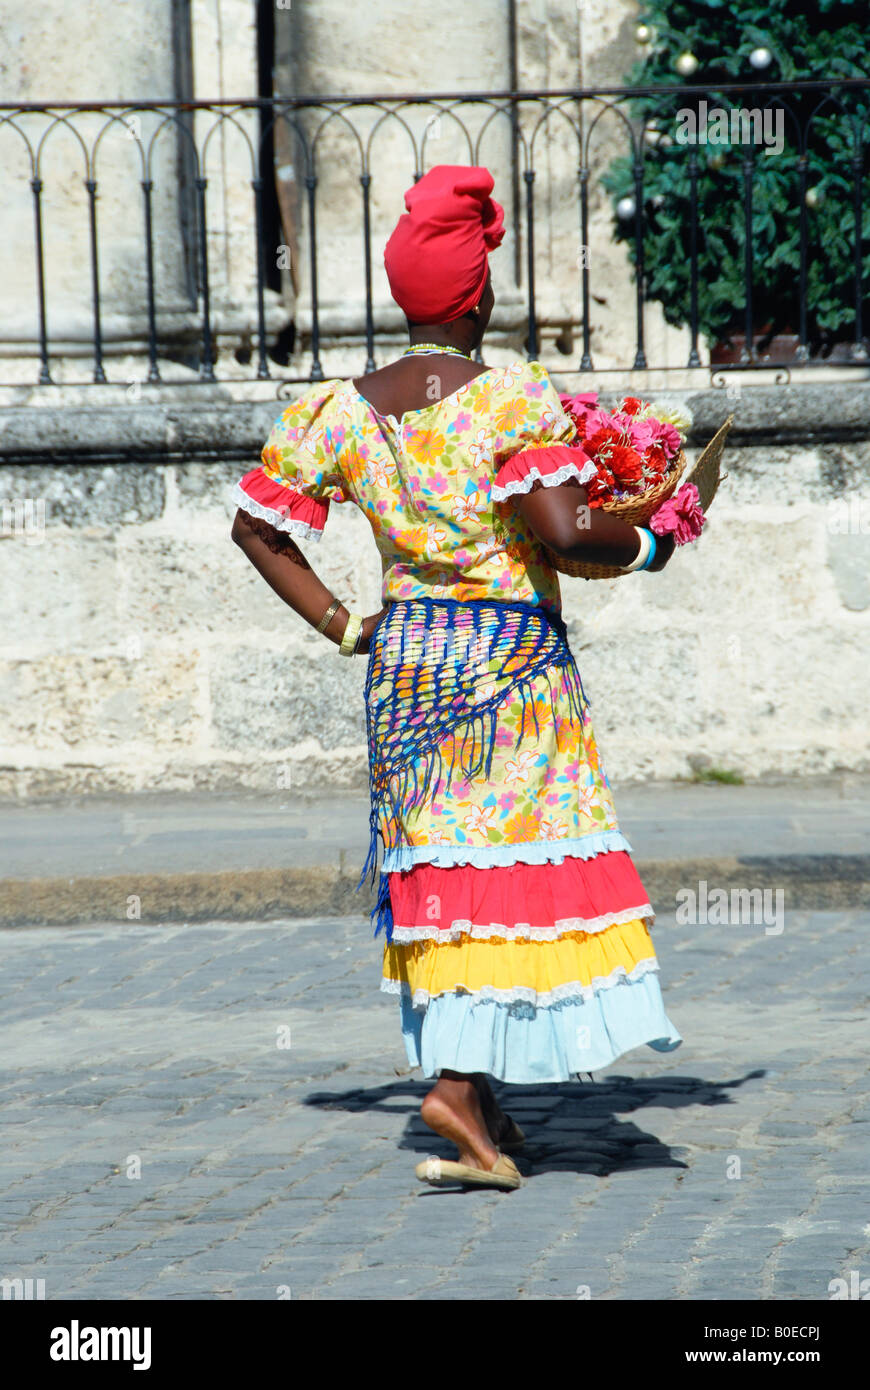 Woman dressed in traditional clothing Havana Cuba Stock Photo